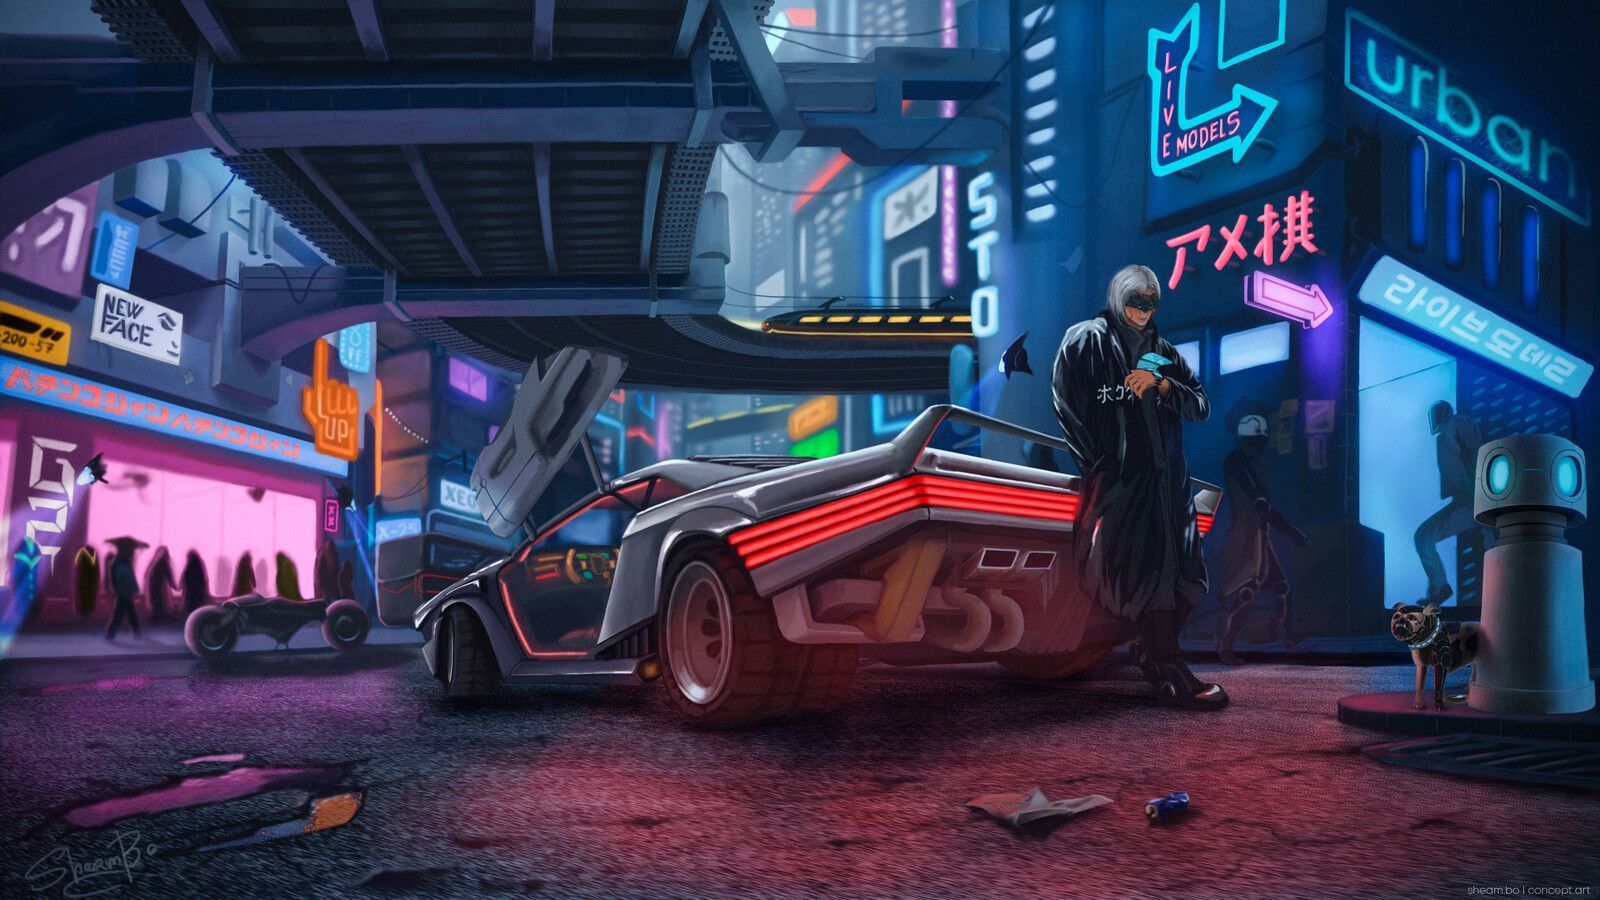 A man standing next to a car in a neon-lit cyberpunk city - Gaming